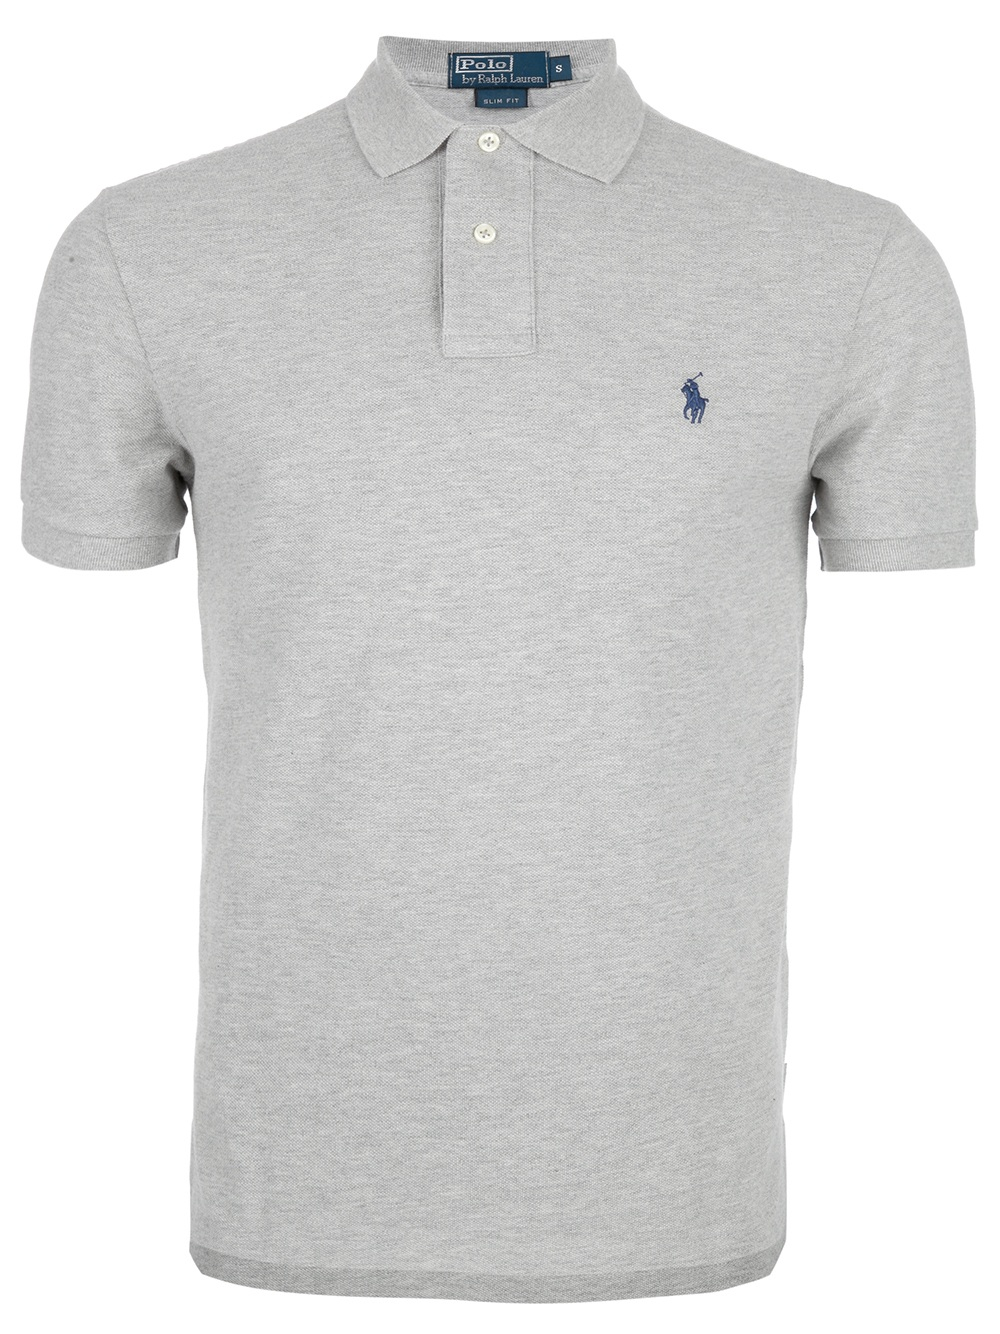 Polo Ralph Lauren Classic Polo Shirt in Gray for Men - Lyst